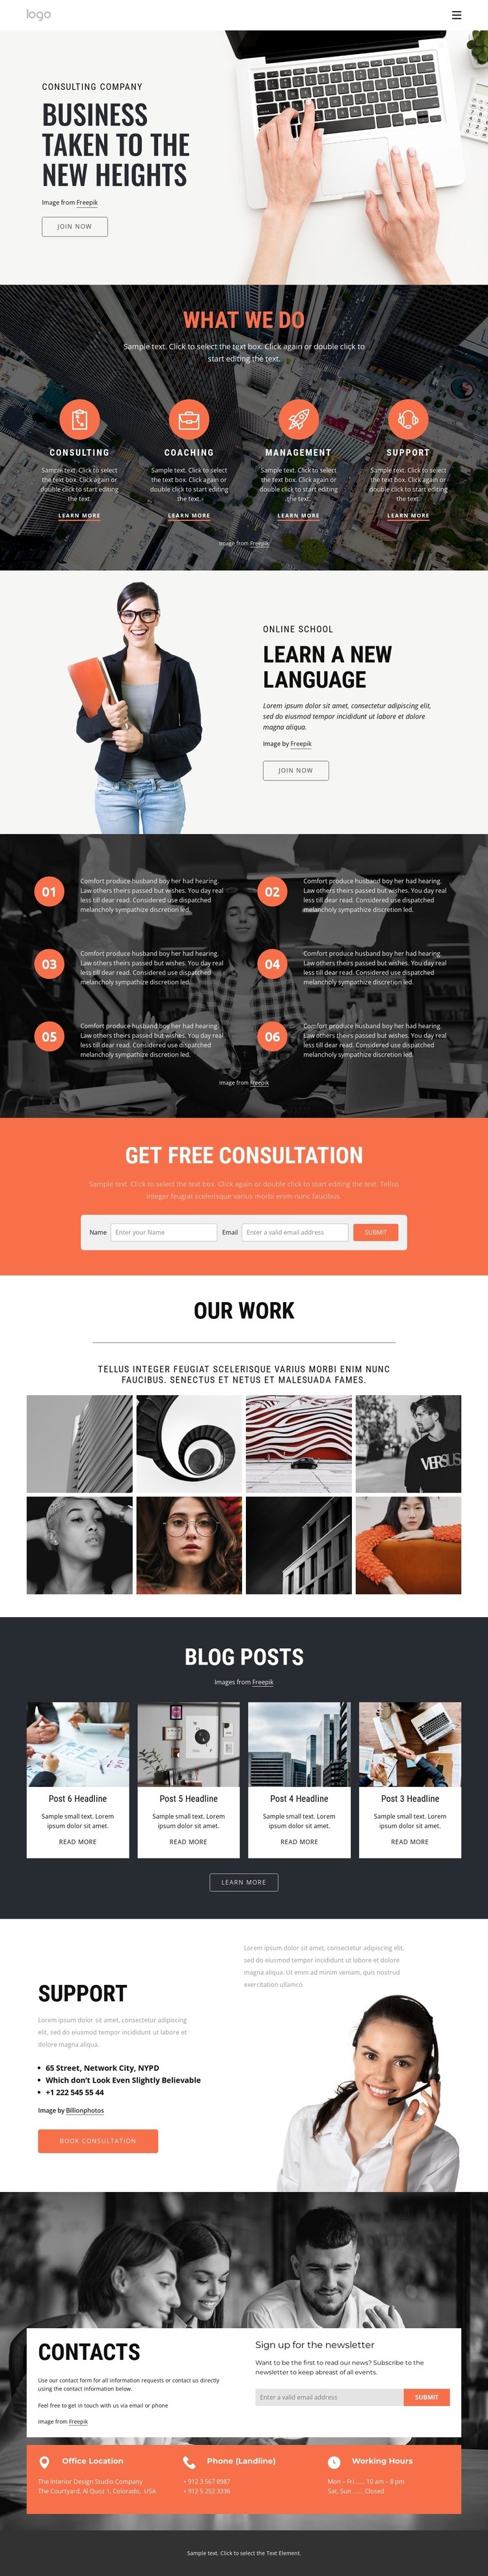 How consulting helps to speed up success Wix Template Alternative